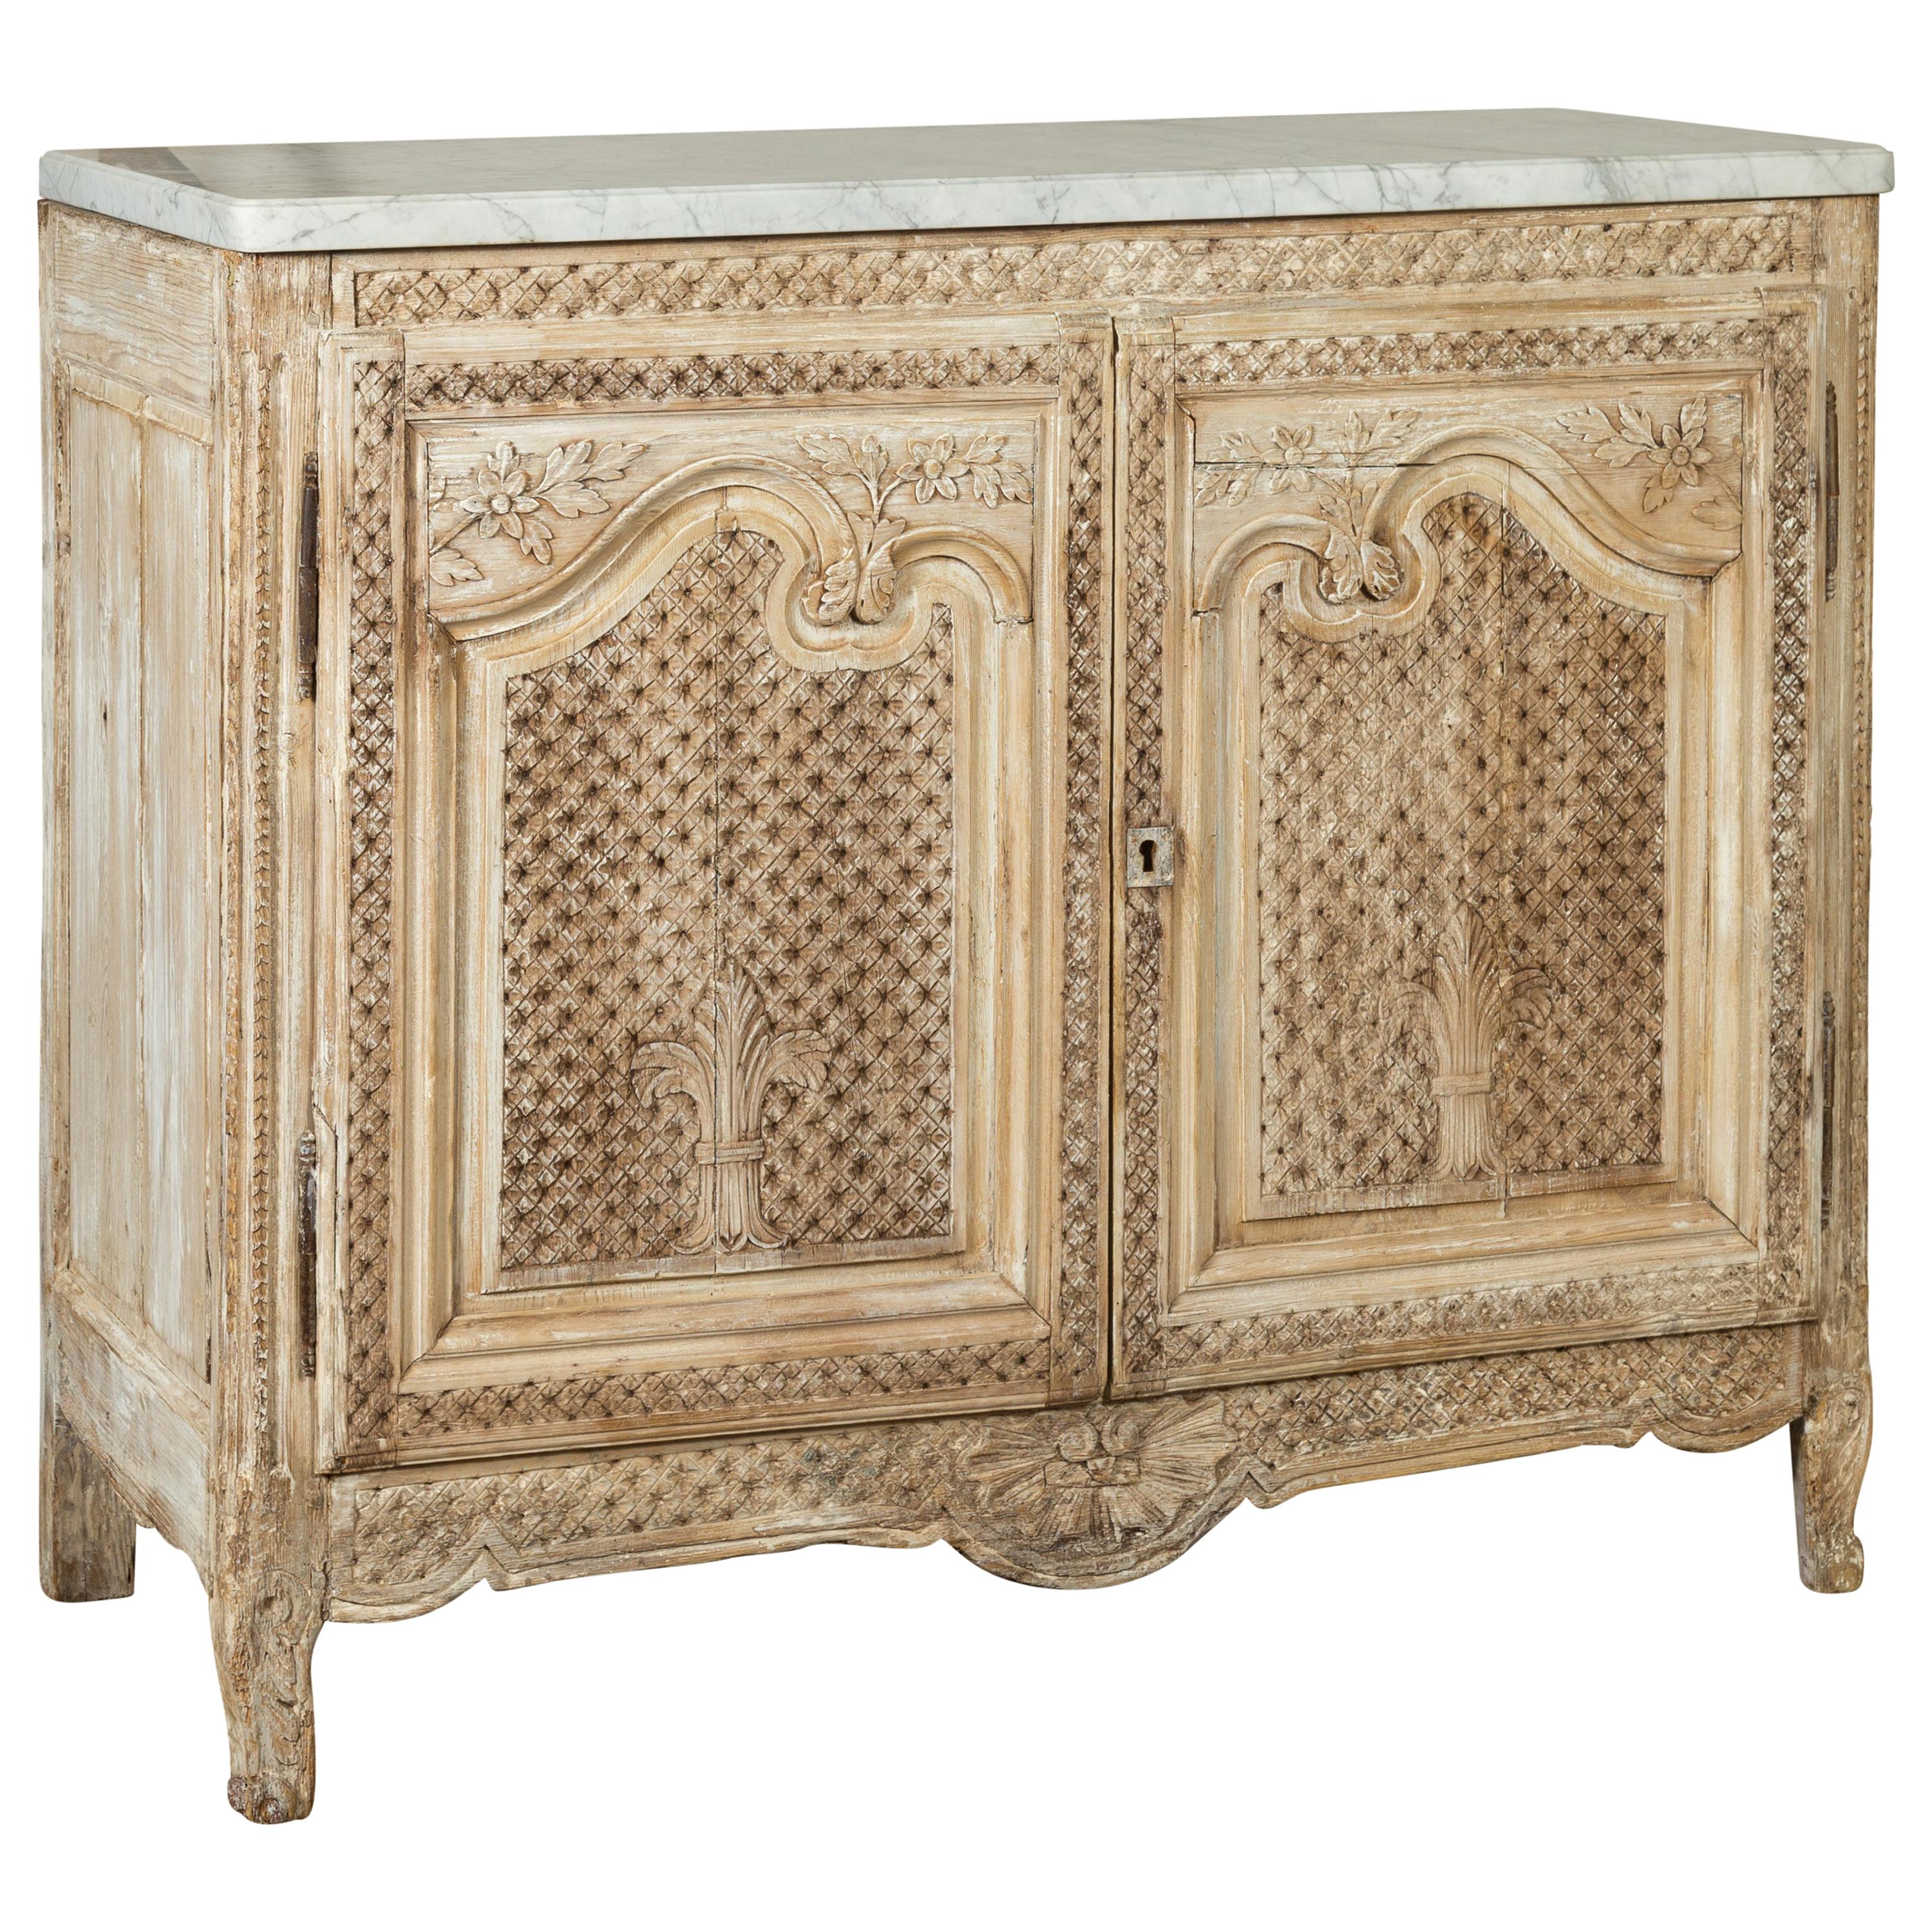 Anglo-Indian 1820s Bleached and Carved Pine Buffet with White Marble Top